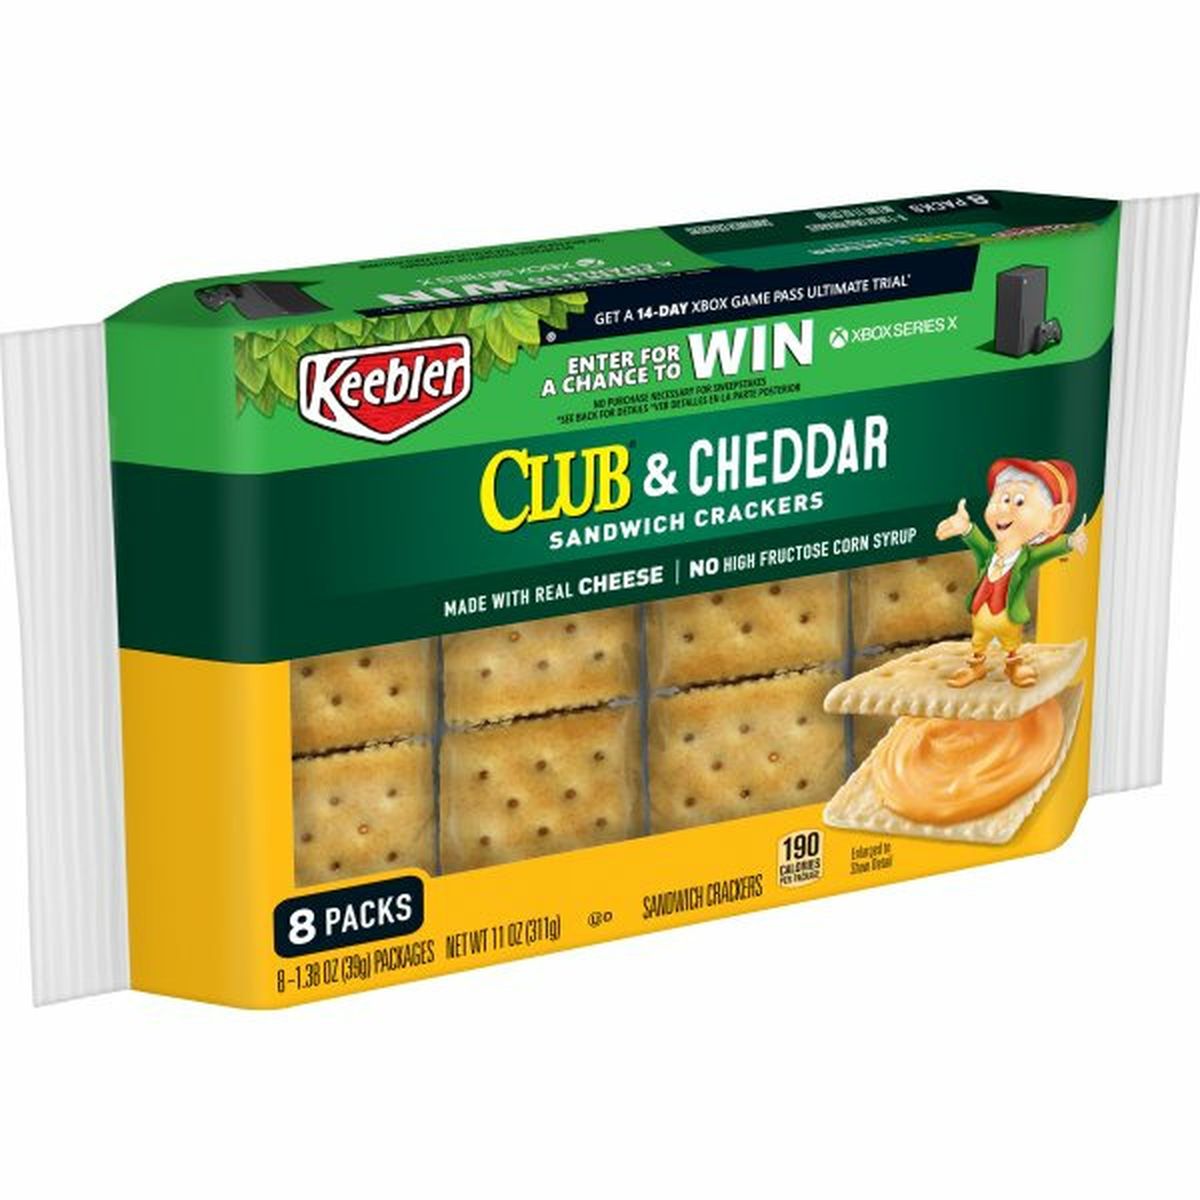 Calories in Keebler Sandwich Crackers, Club and Cheddar